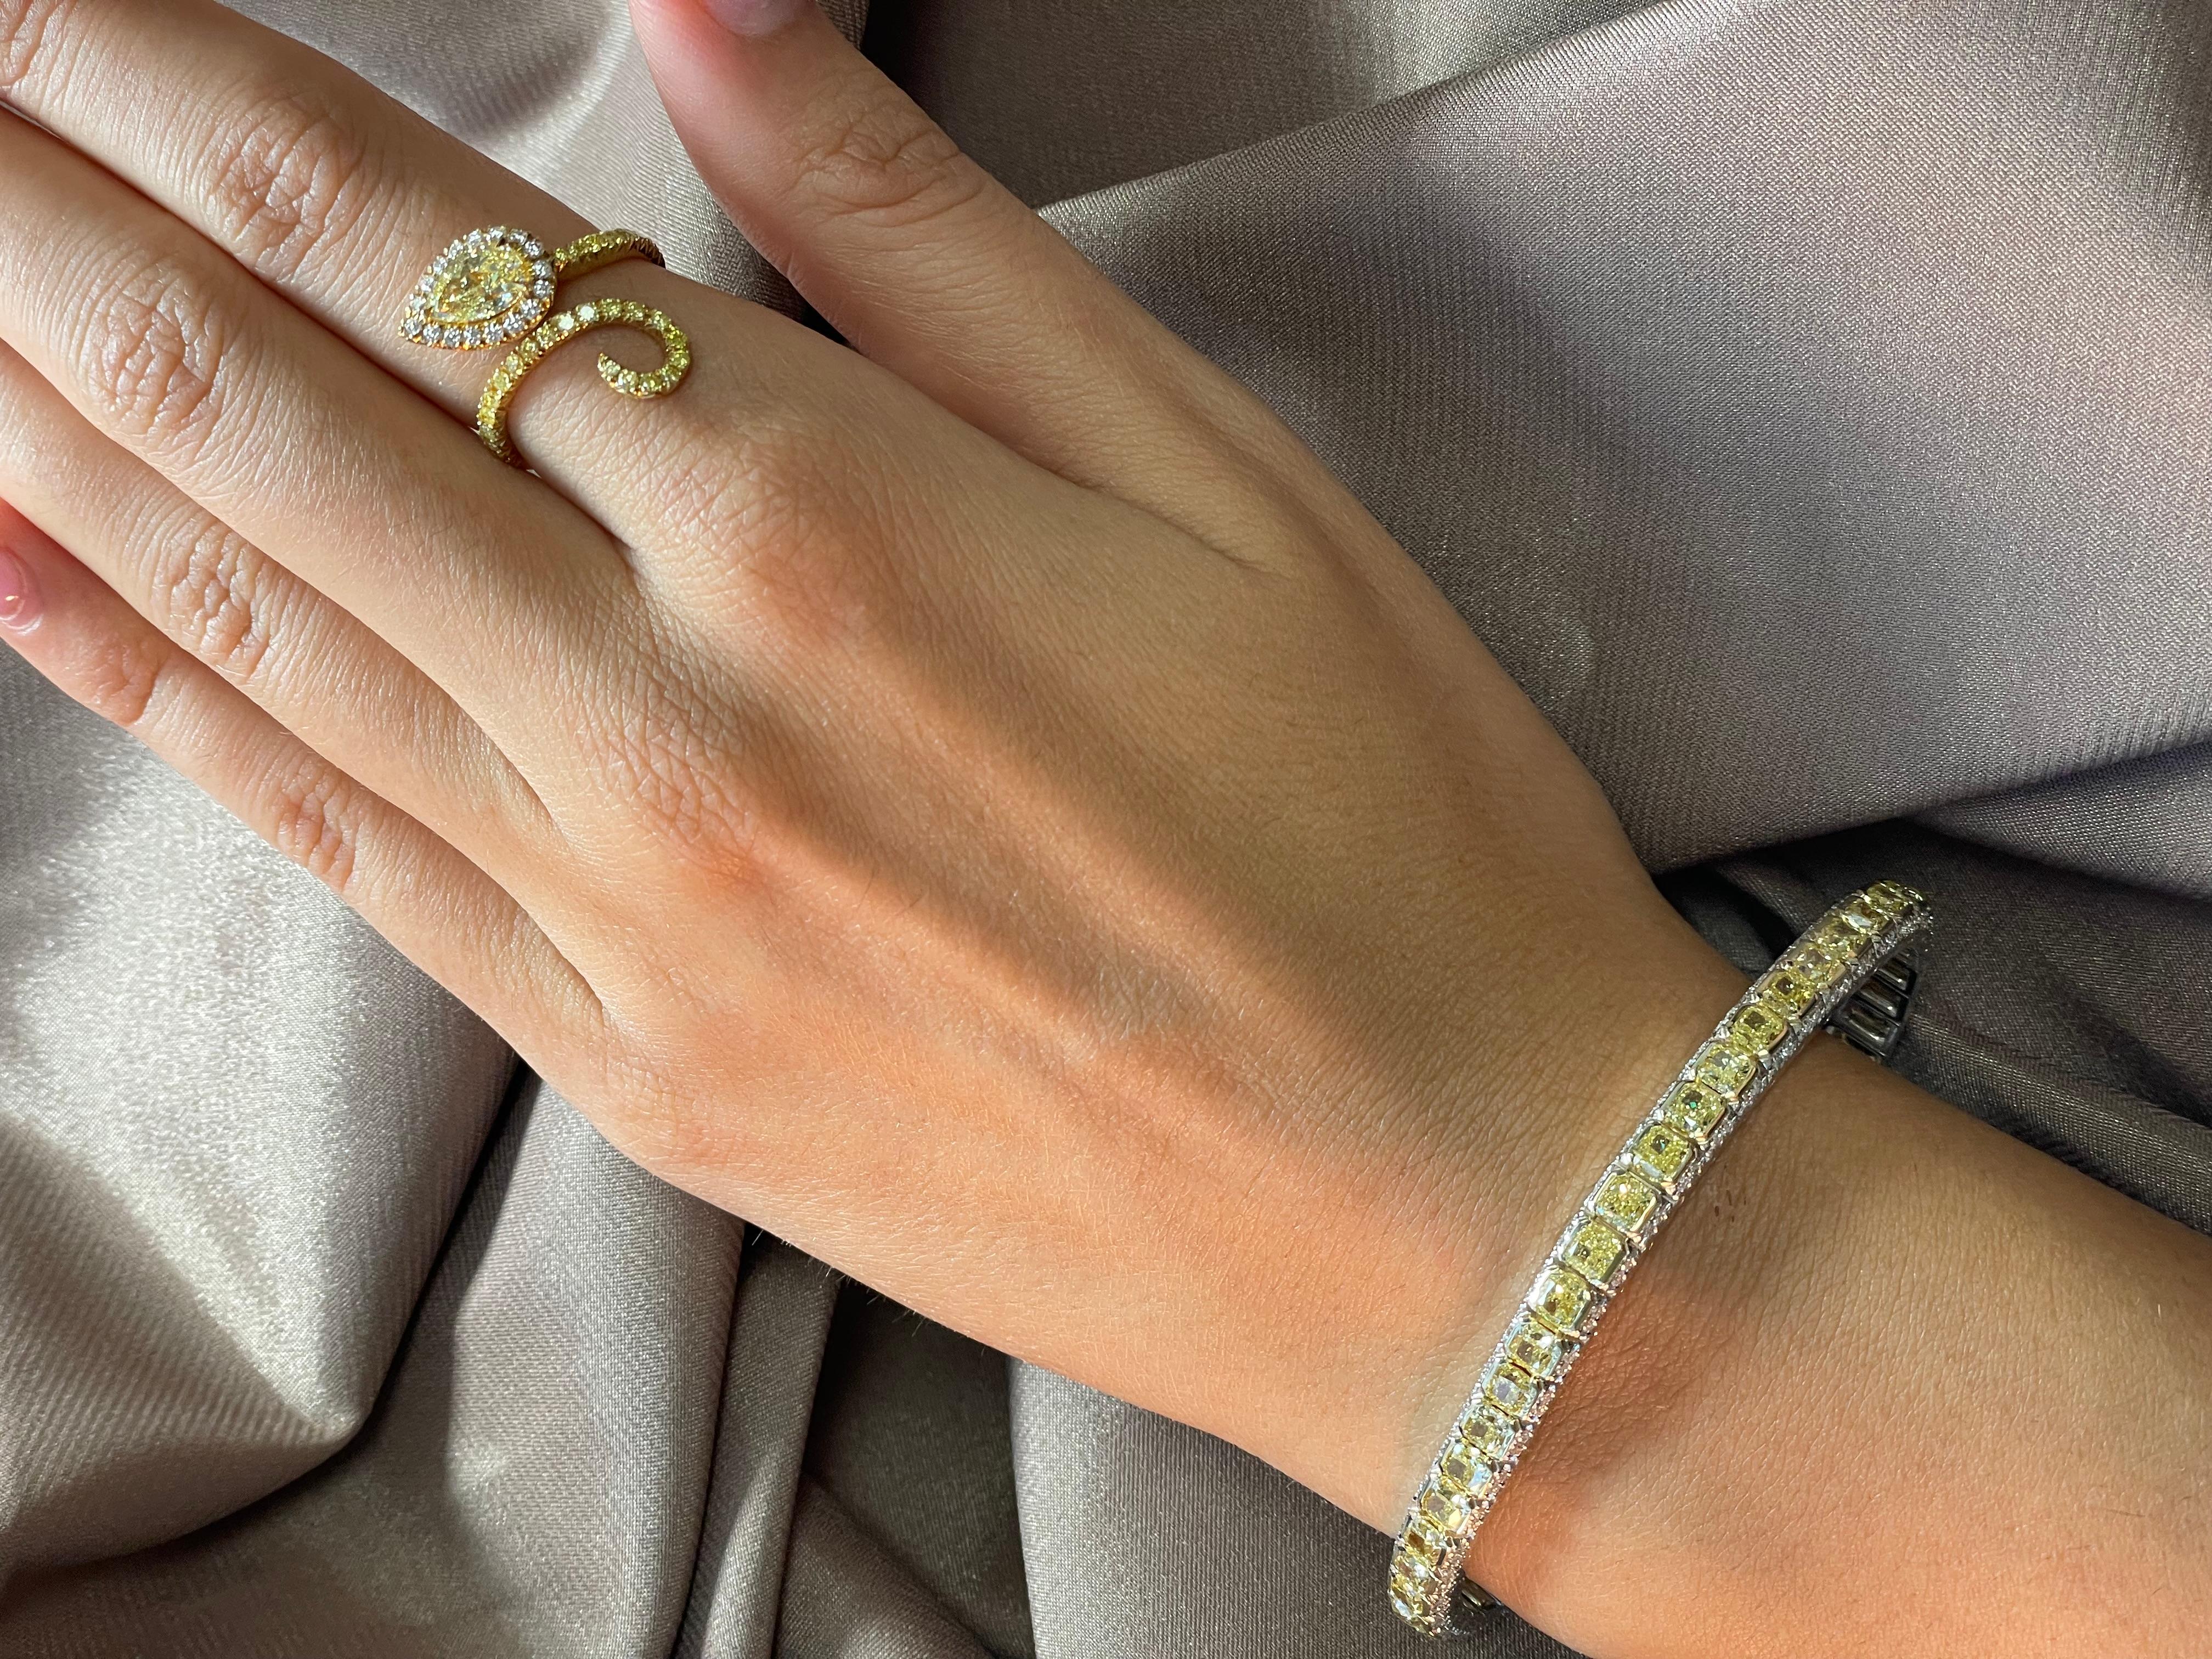 Introducing an exquisite 11.77-carat total weight Yellow Diamond bracelet, a true masterpiece. This stunning bracelet is expertly crafted from 18-karat white and yellow gold and showcases 46 meticulously selected yellow cushion-cut diamonds. These